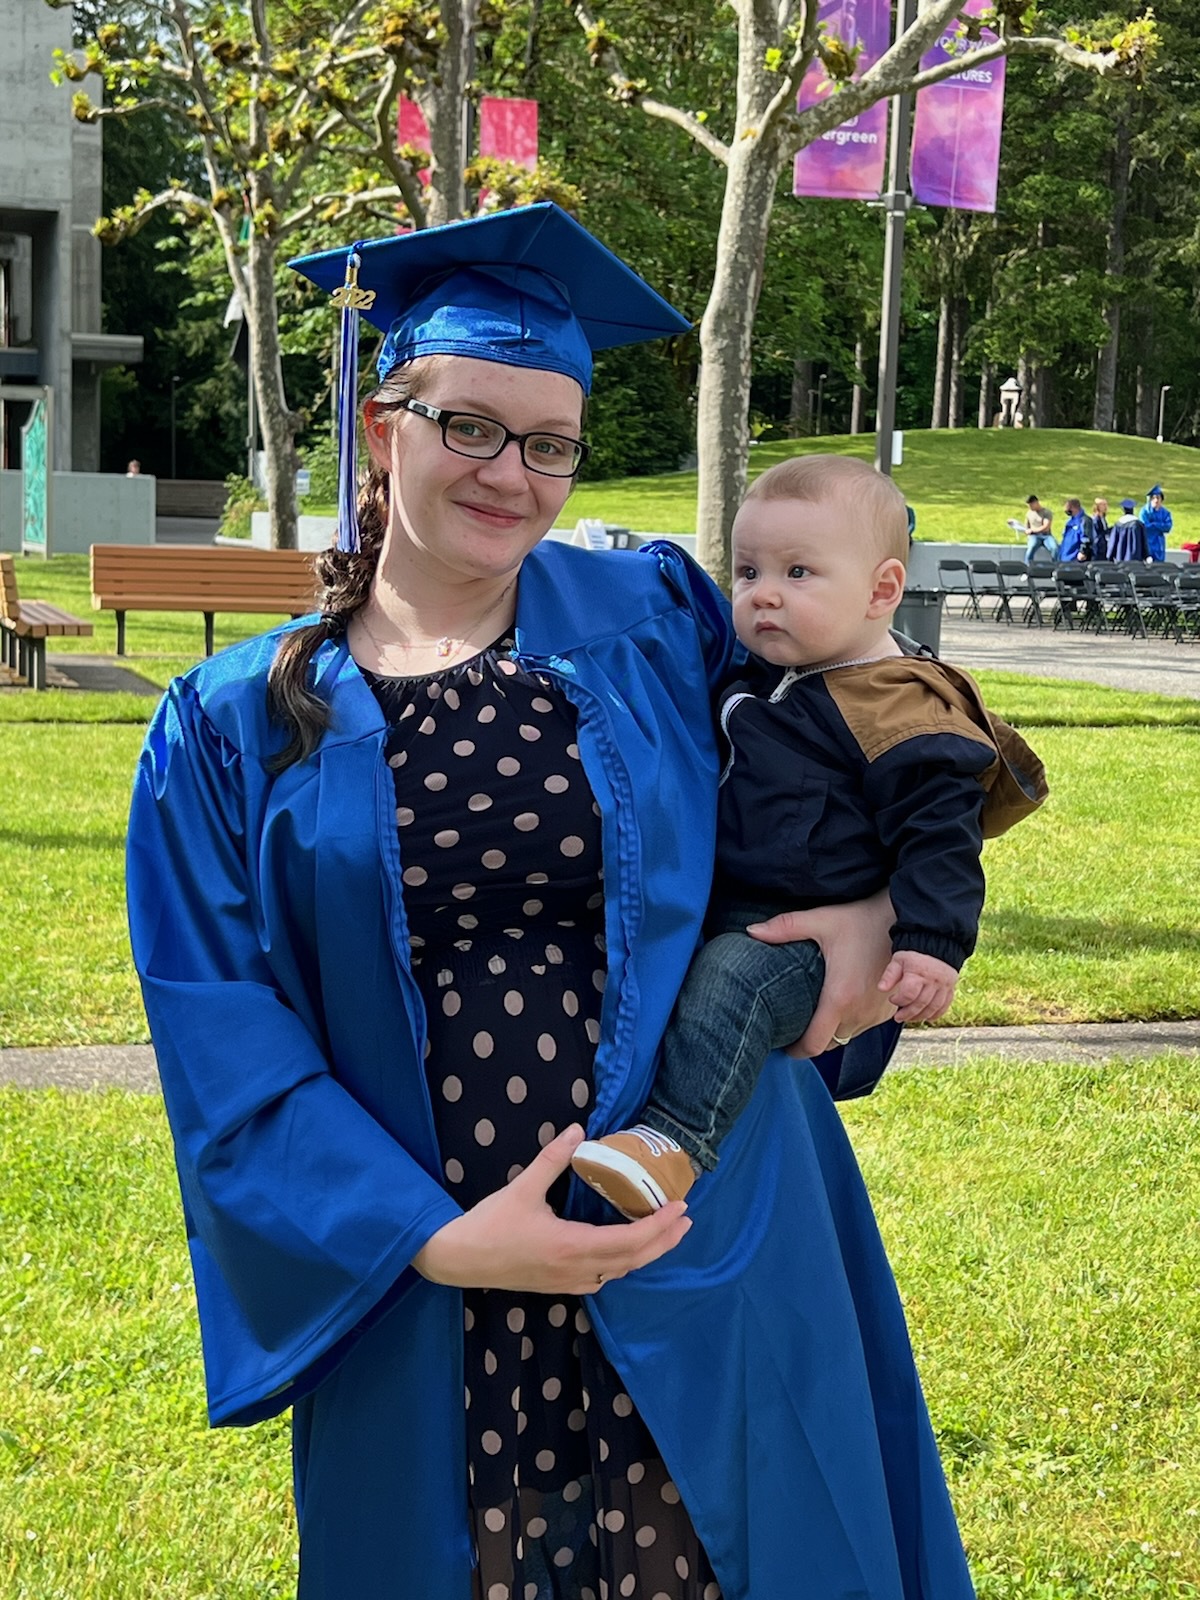 Ivy Group holds her baby while wearing a graduation gown